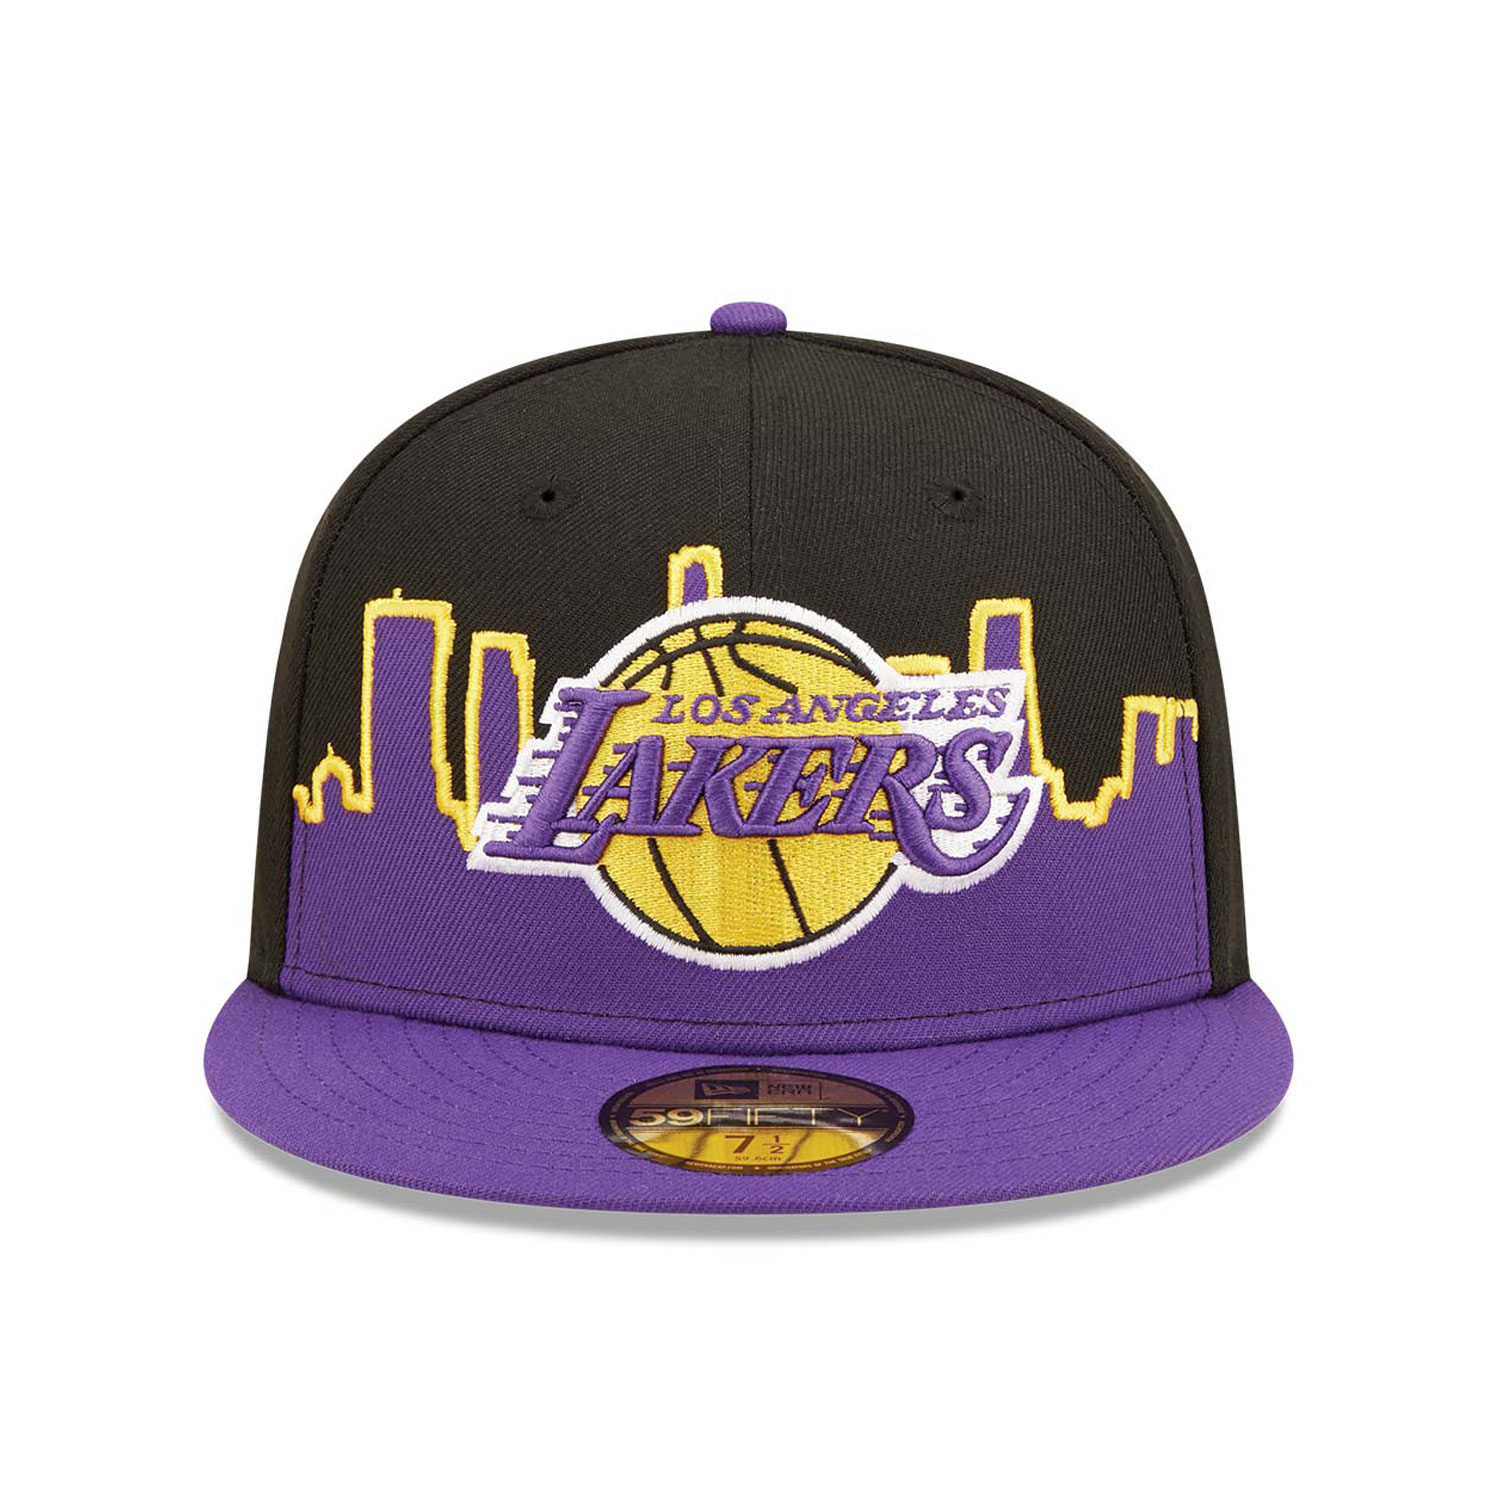 Official New Era NBA Tip Off LA Lakers Black 59FIFTY Fitted Cap B9454_766  B9454_766